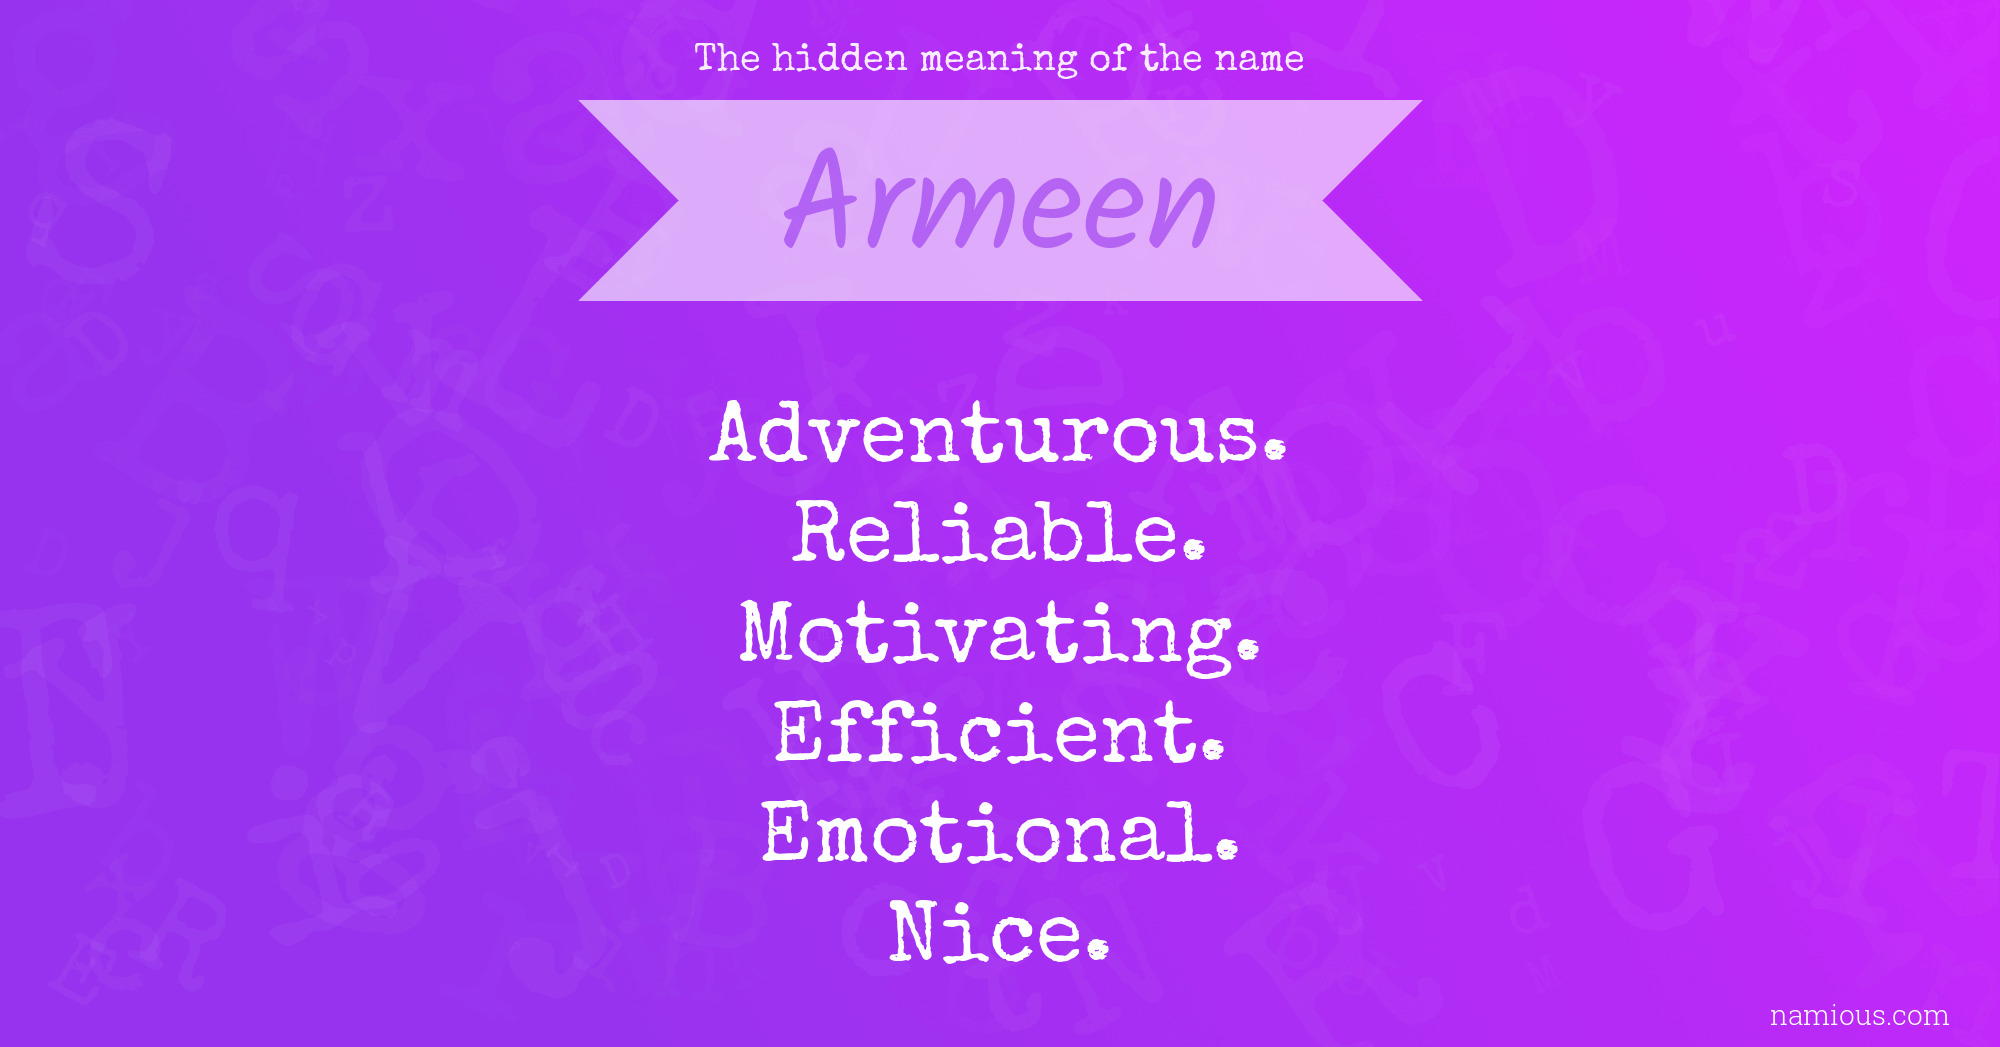 The hidden meaning of the name Armeen